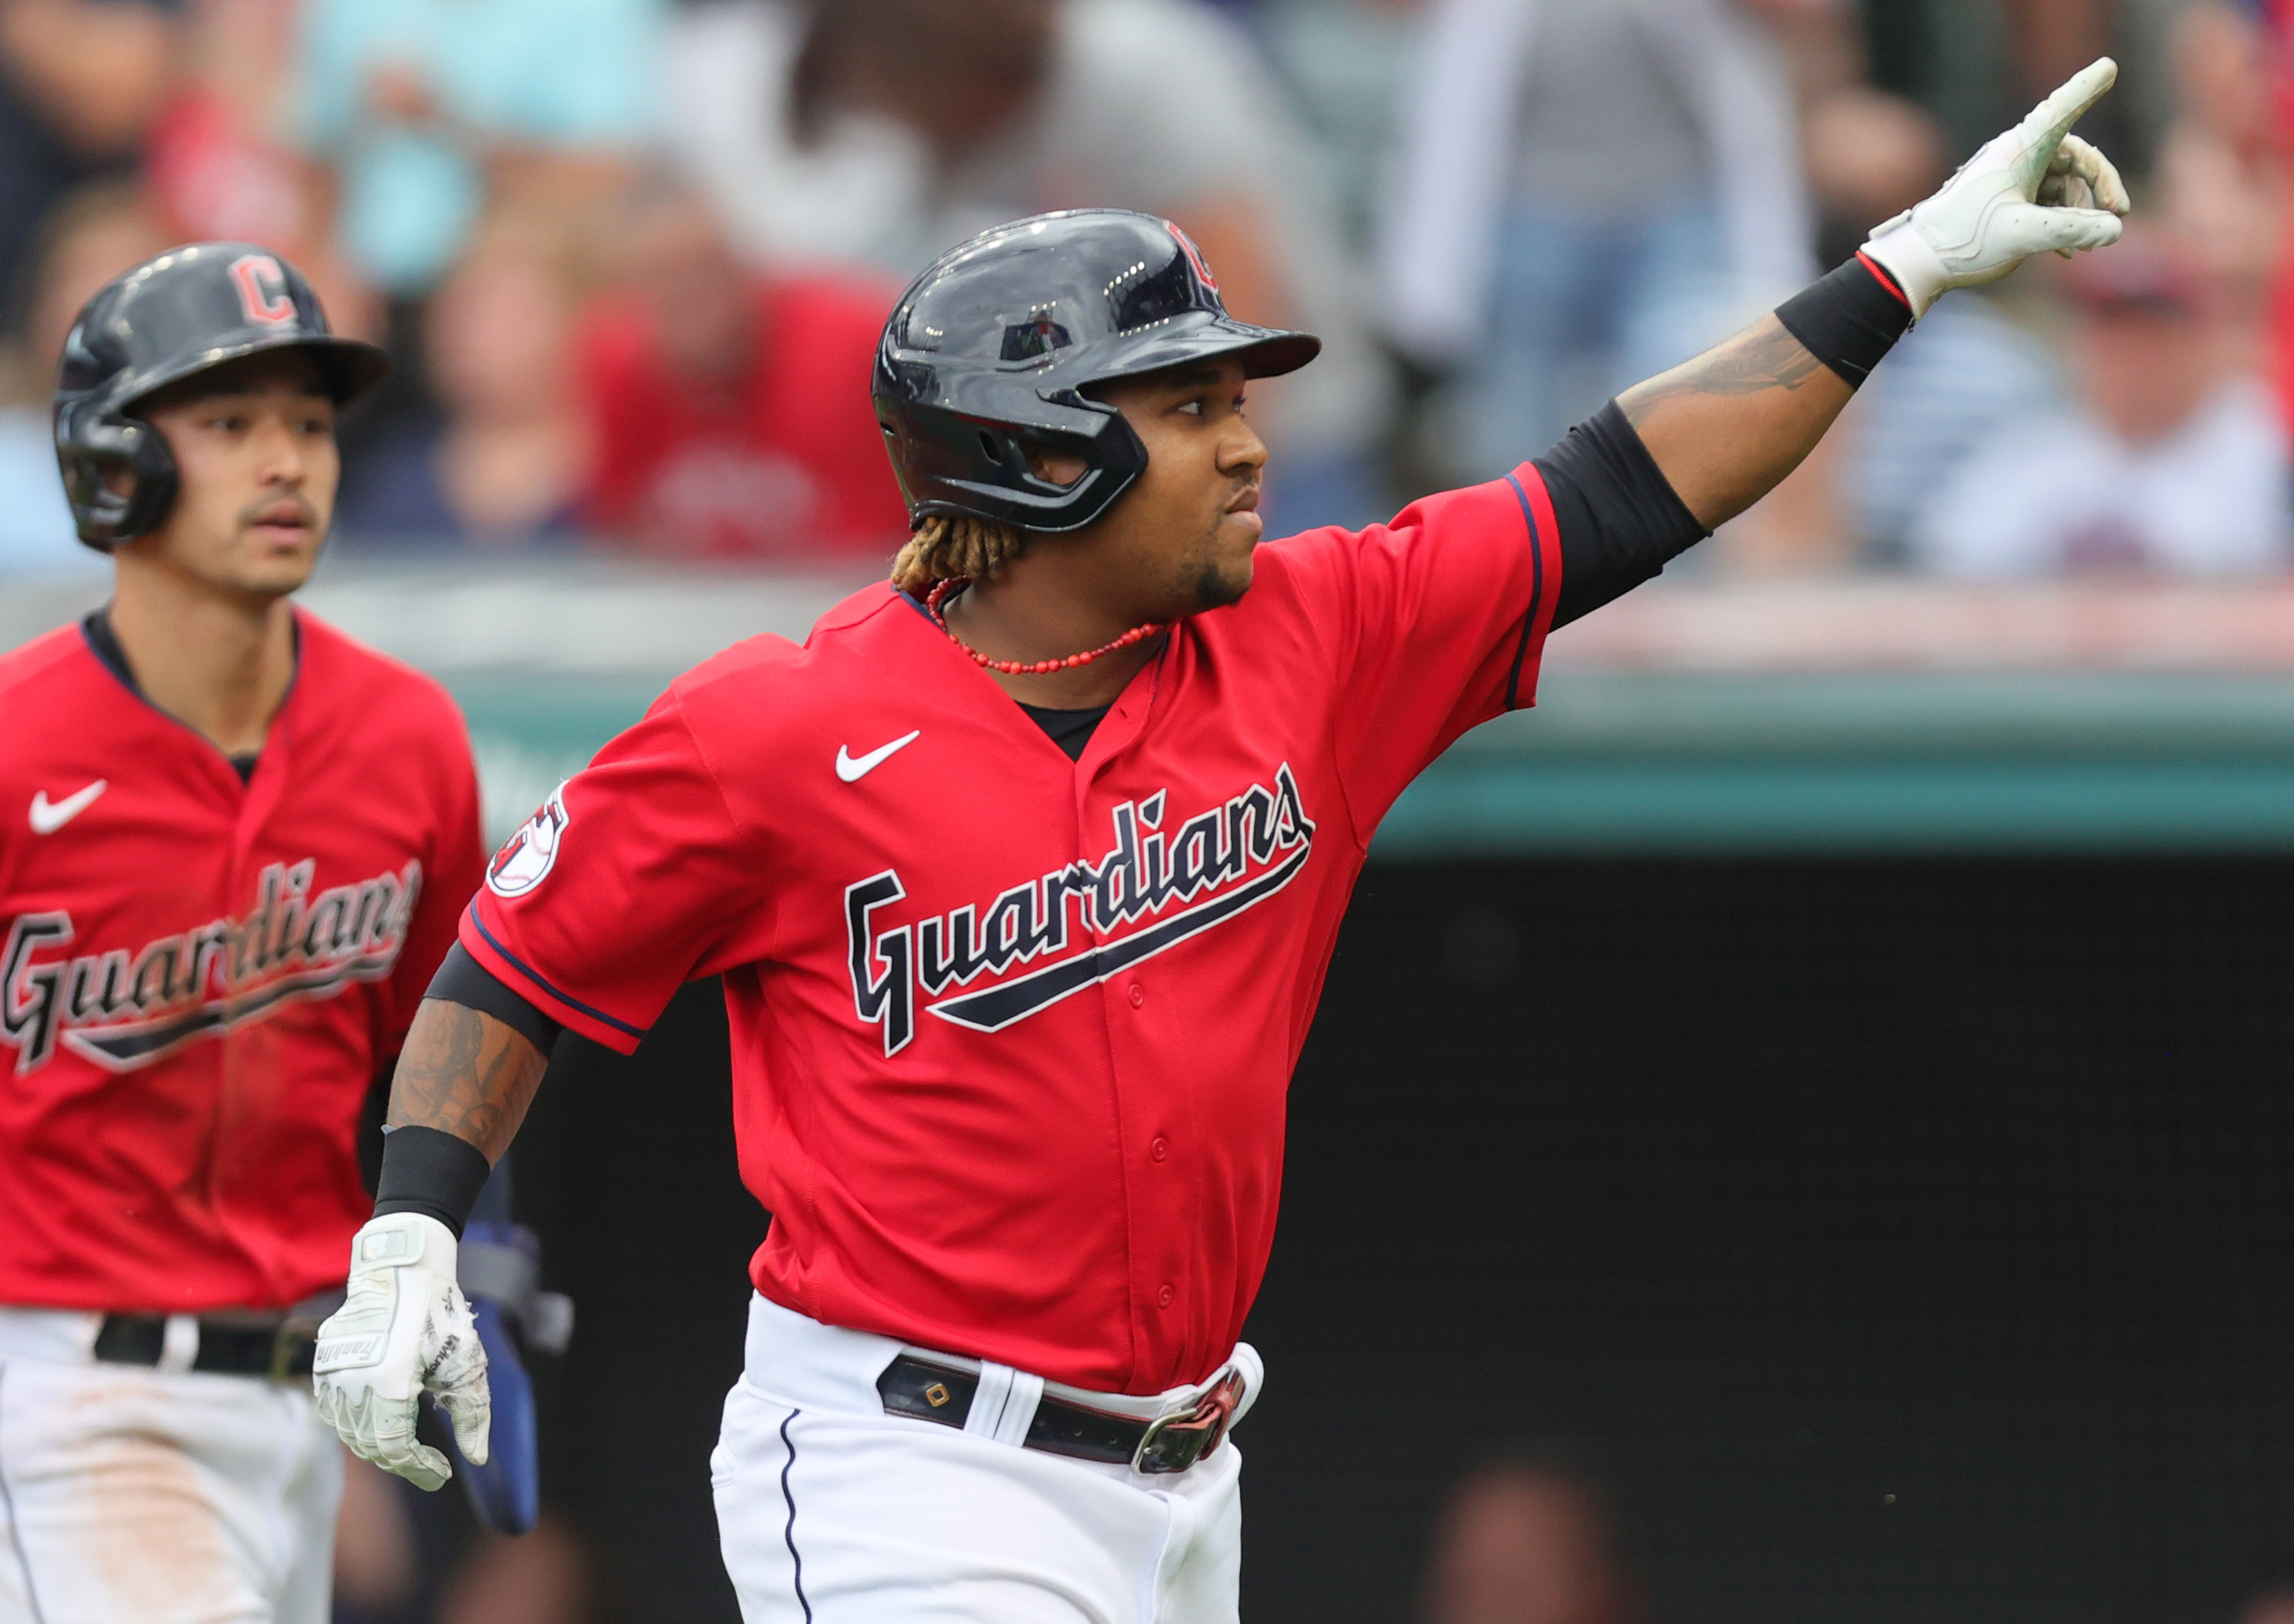 Uniforms worn for Cleveland Indians at Detroit Tigers on May 1